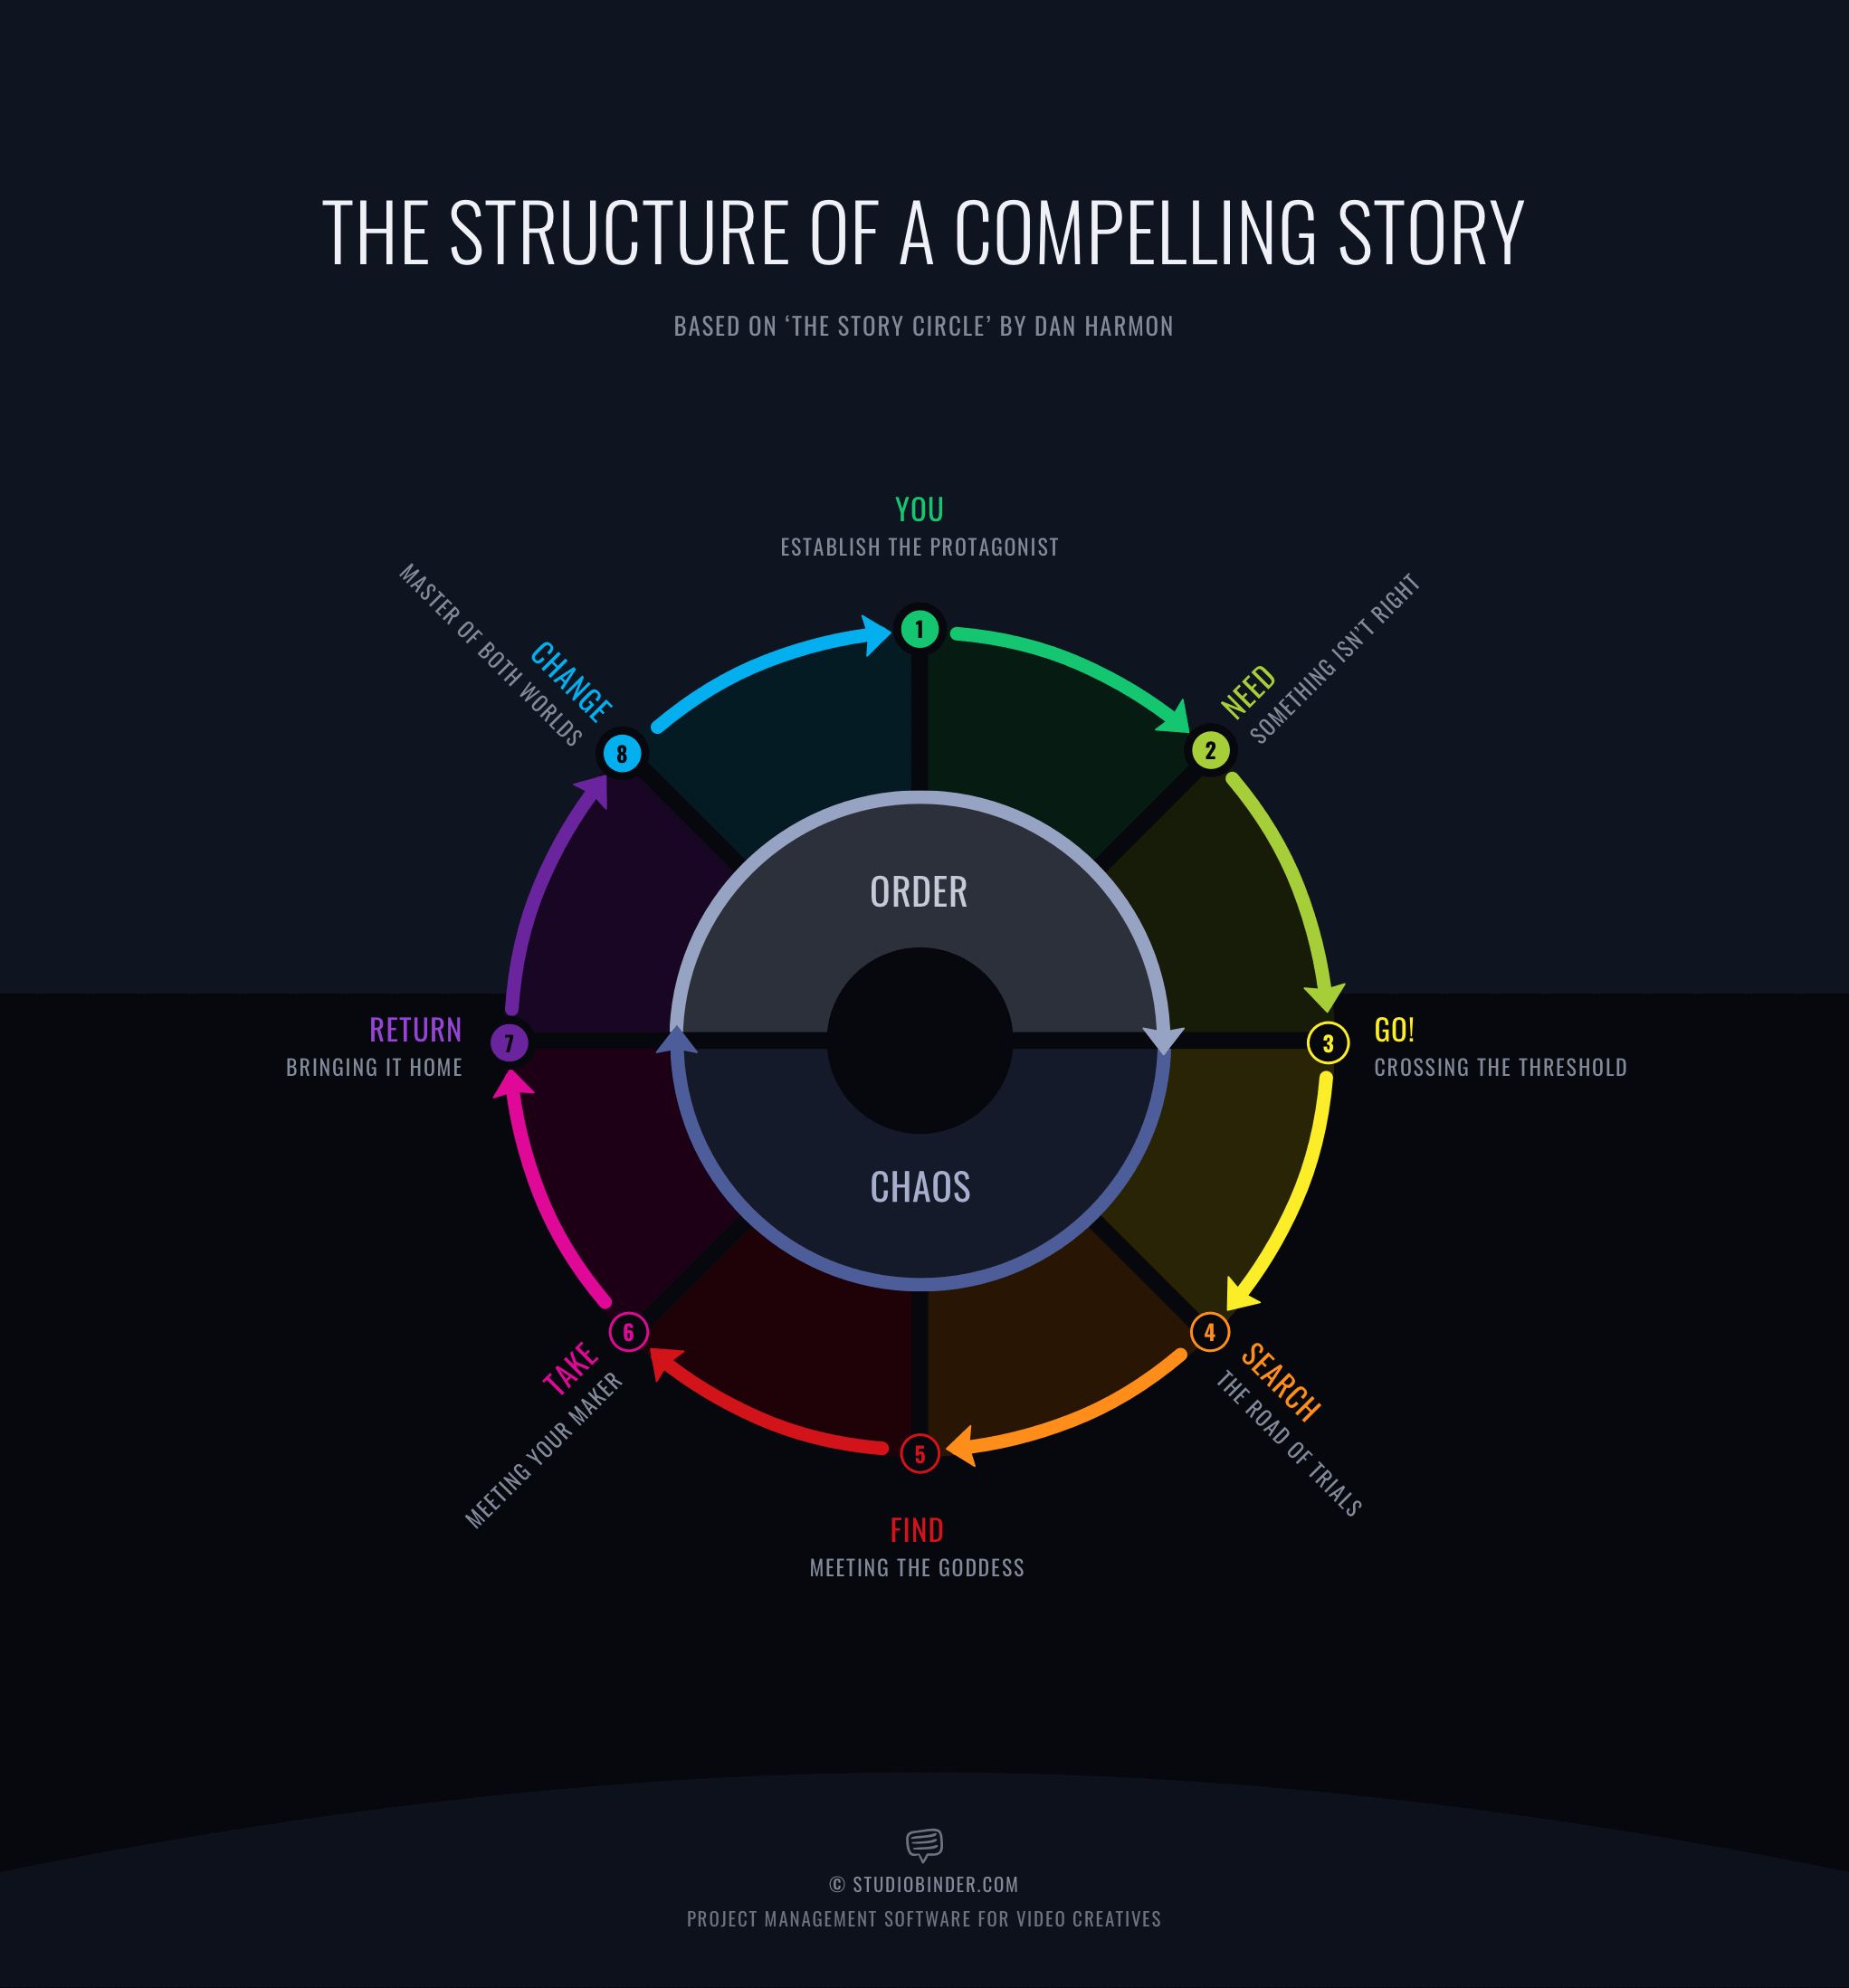 How to Write a Story Outline - Free Script Template - Story Circle Structure by Dan Harmon - StudioBinder